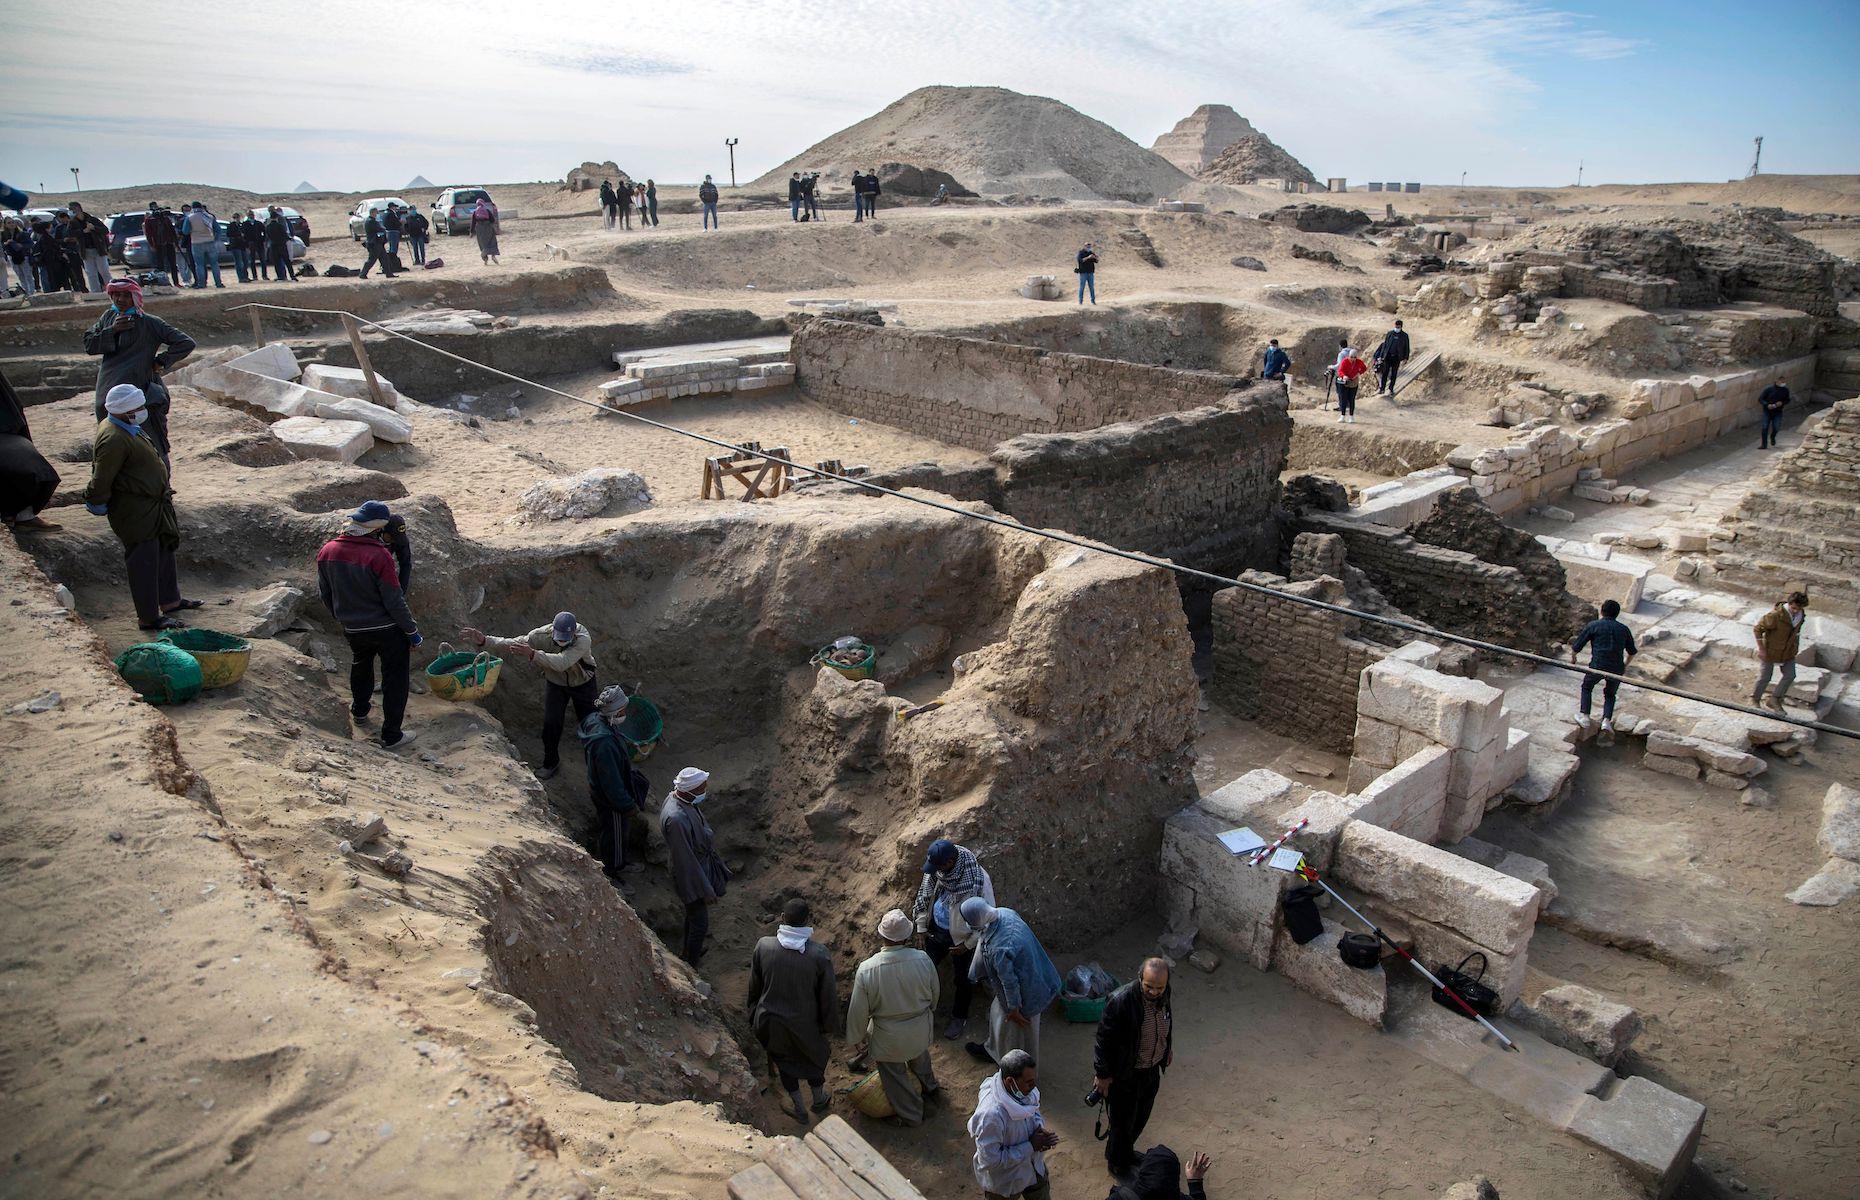 <p>A series of significant new discoveries were made at Saqqara, a vast ancient burial ground south of Cairo known for its stepped pyramid, in January 2021. Archaeologists unearthed <a href="https://abcnews.go.com/International/egypt-unlocks-secrets-saqqara-discovery-temple-sarcophagi/story?id=75322551">the funerary temple of Queen Nearit</a>, a previously unknown wife of King Teti, the first pharaoh of the Sixth Dynasty who ruled between 2323 BC and 2150 BC.</p>